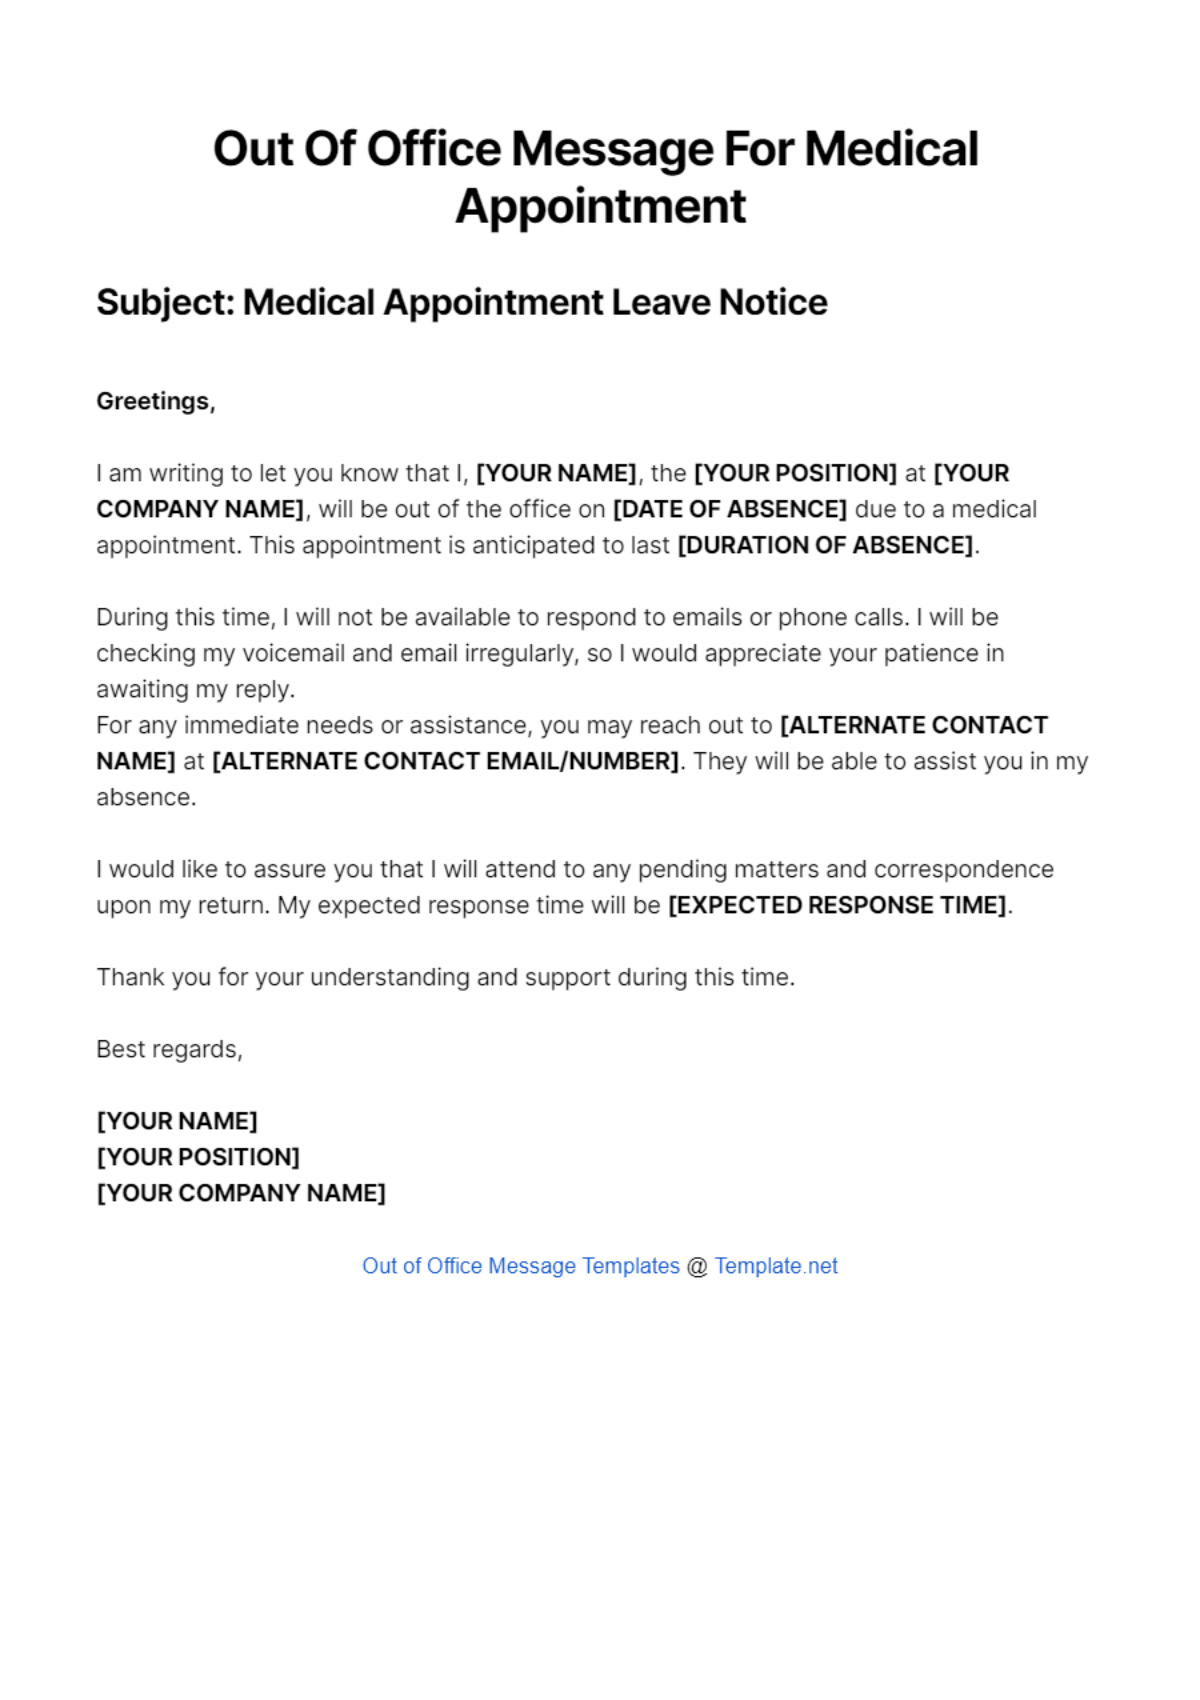 Out Of Office Message For Medical Appointment Template